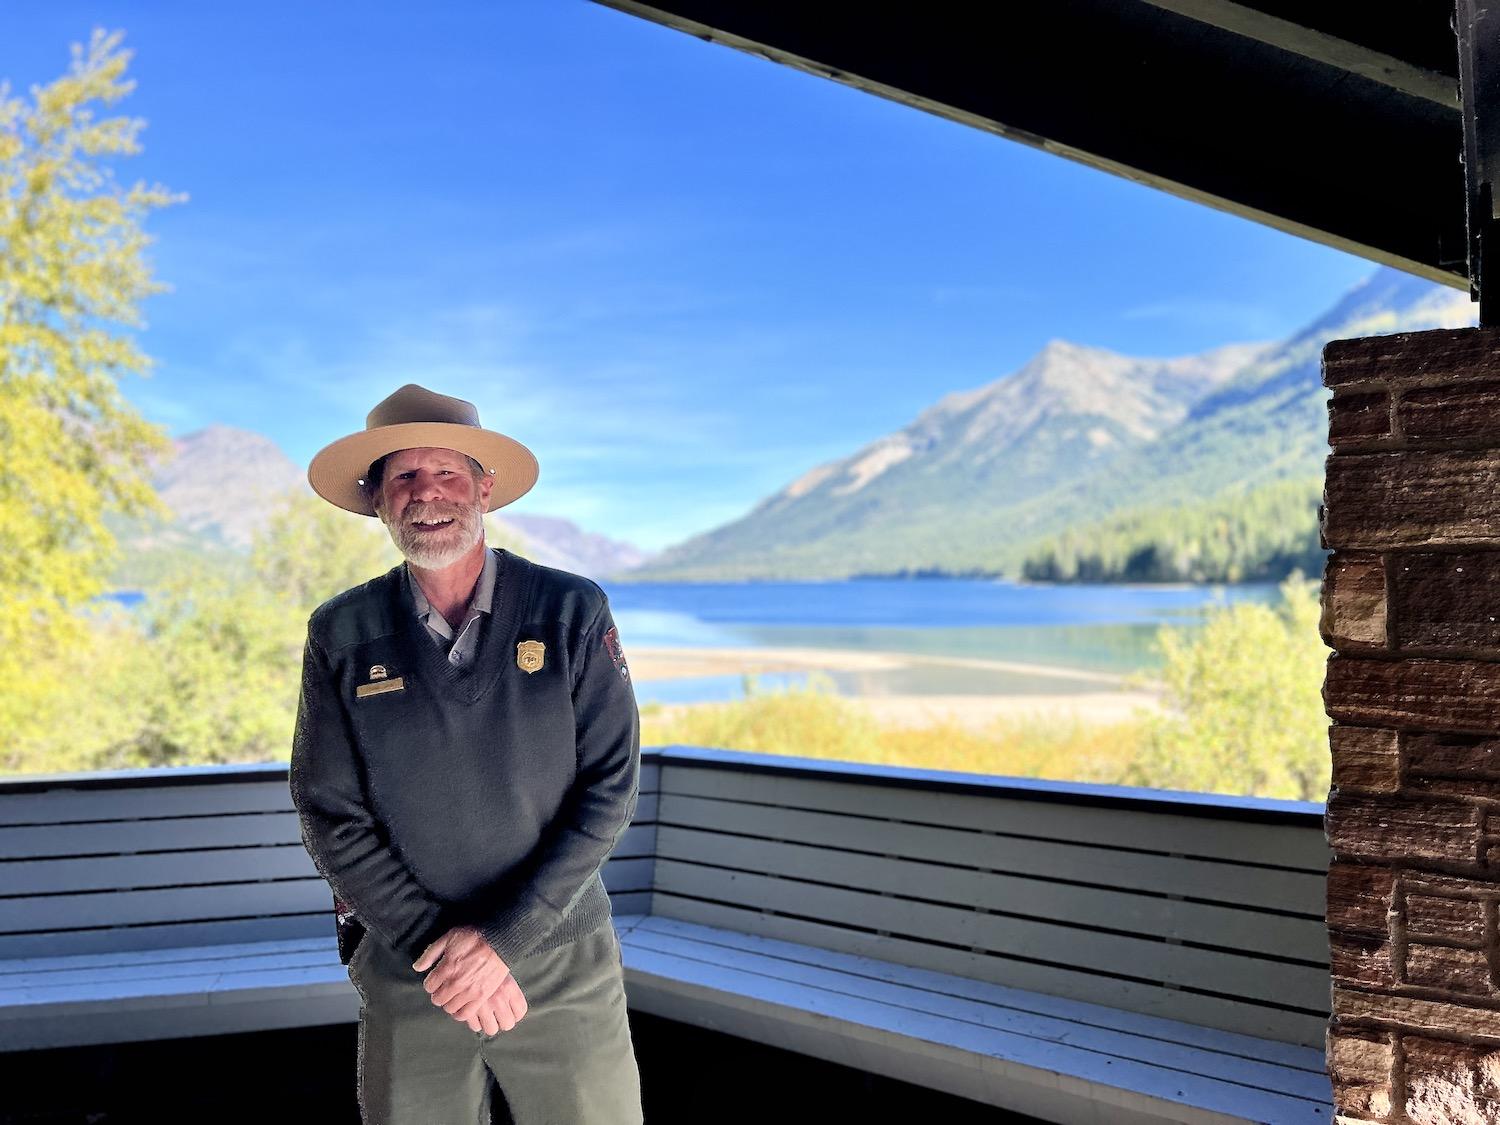 Glacier National Park interpretive ranger Frank Jahn stands in the Snowflake Pavilion at Goat Haunt in front of a landscape so beautiful that it looks like a painting.